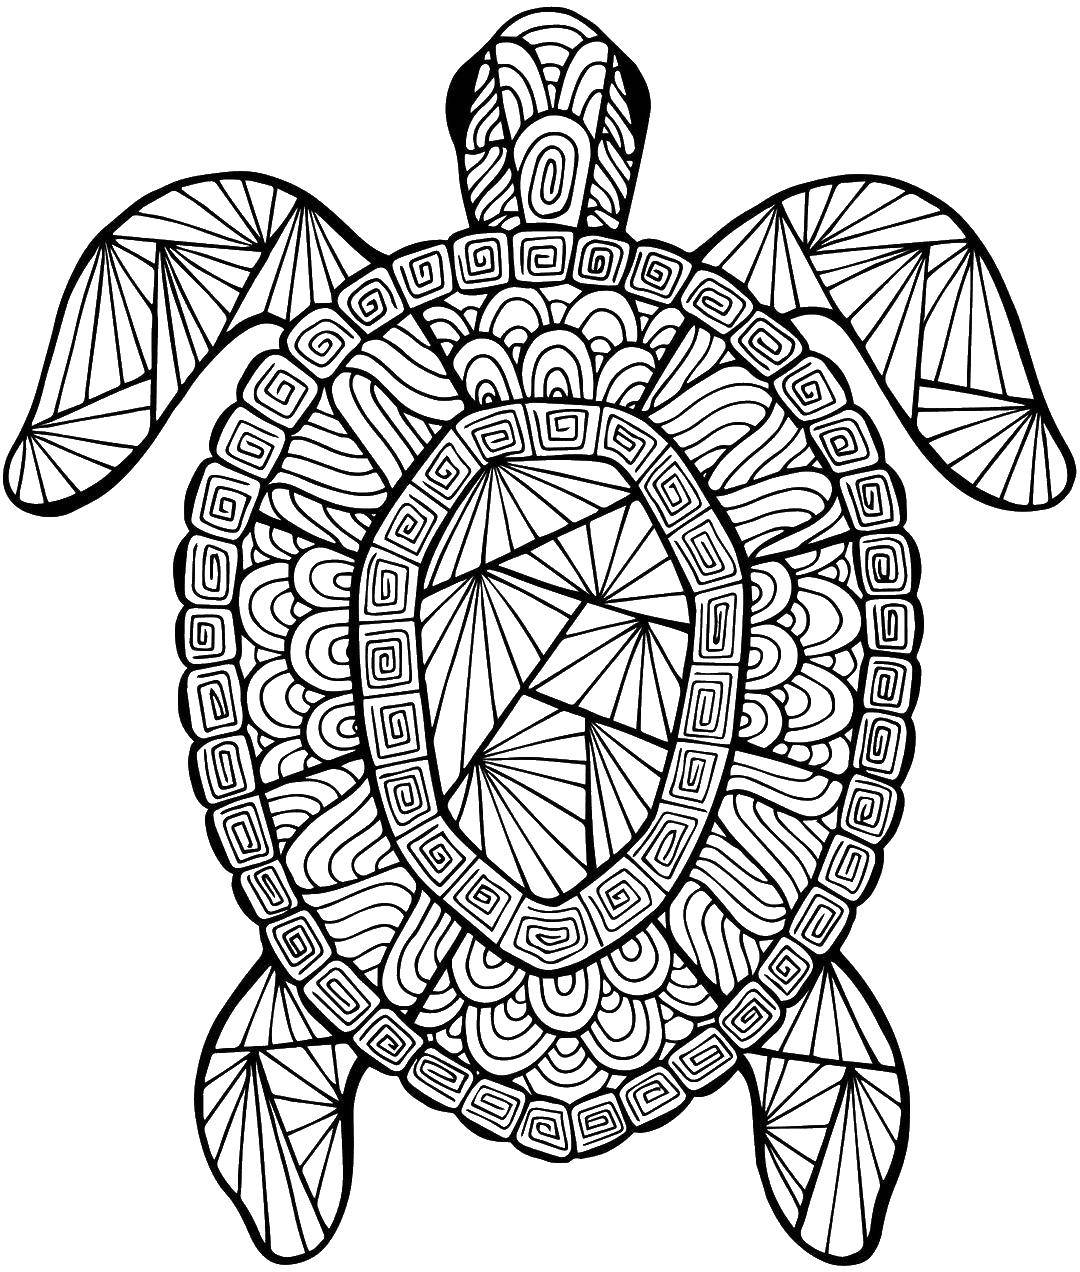 Coloring Antistress, turtle. Category coloring antistress. Tags:  turtle, patterns, anti-stress.